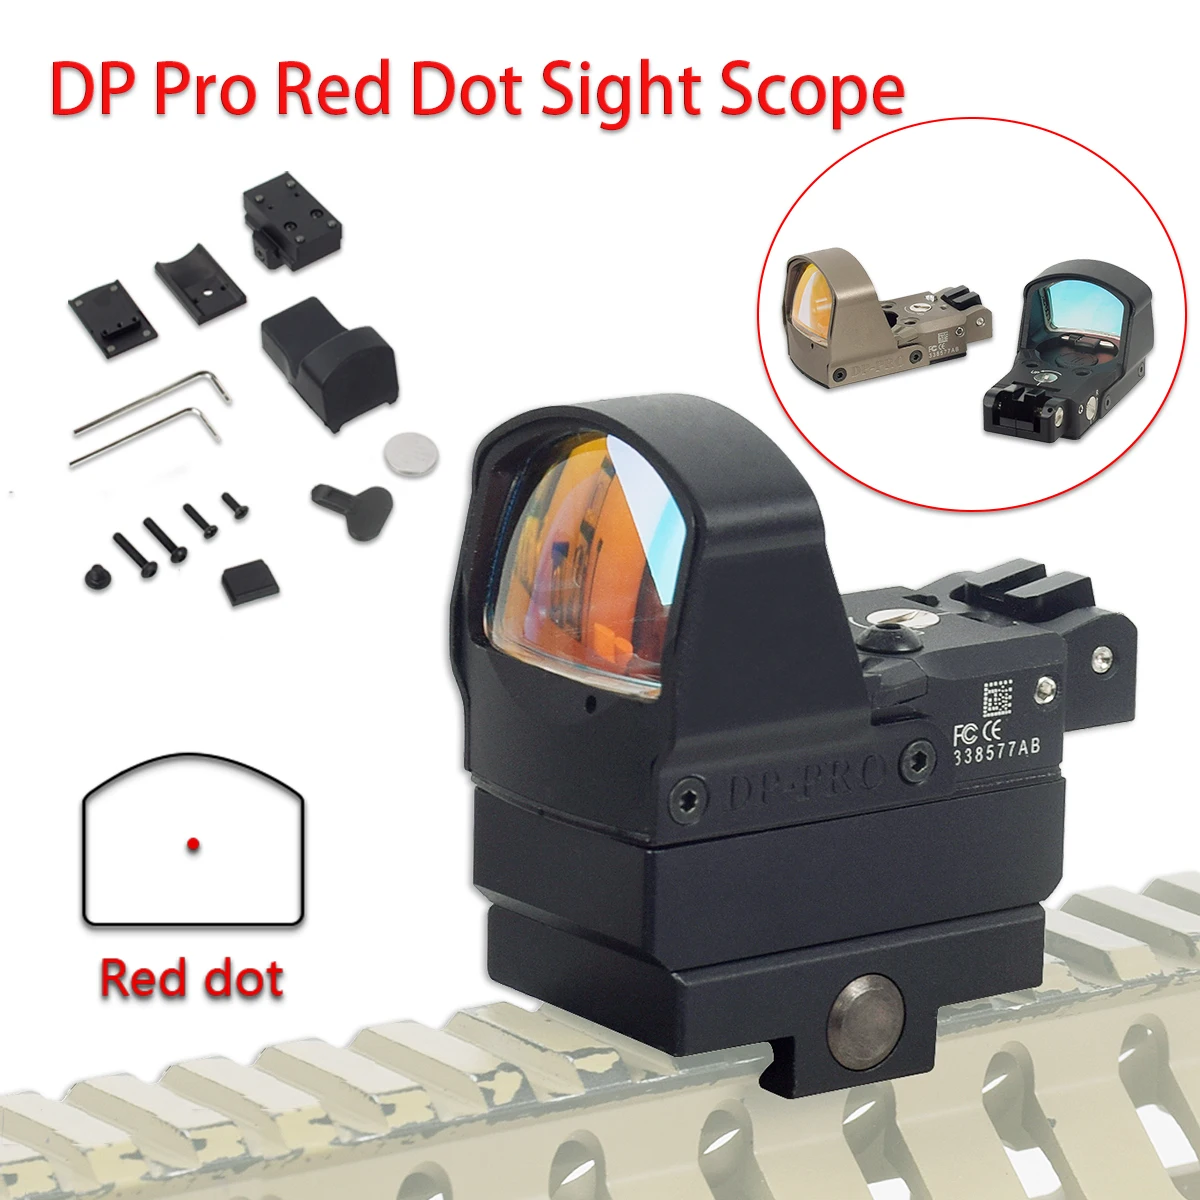 

Tactical Optics Holographic Red Dot Sight Scope LP DP Pro Reflex With Airsoft KSC KWA Glock 1911 1913 Mount Hunting Riflescope